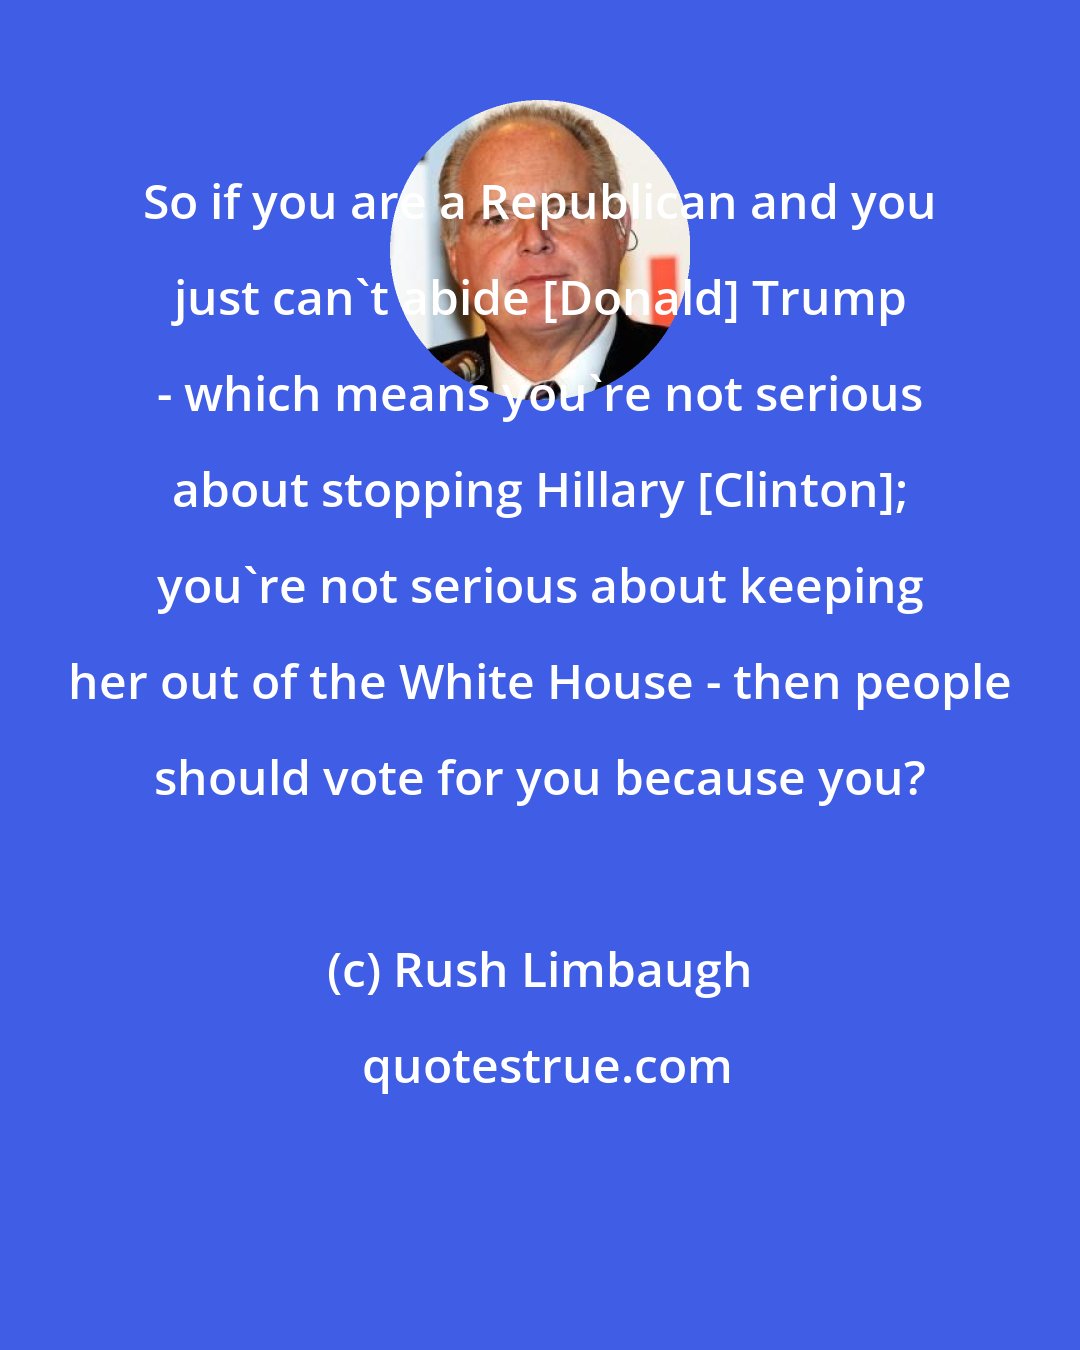 Rush Limbaugh: So if you are a Republican and you just can't abide [Donald] Trump - which means you're not serious about stopping Hillary [Clinton]; you're not serious about keeping her out of the White House - then people should vote for you because you?